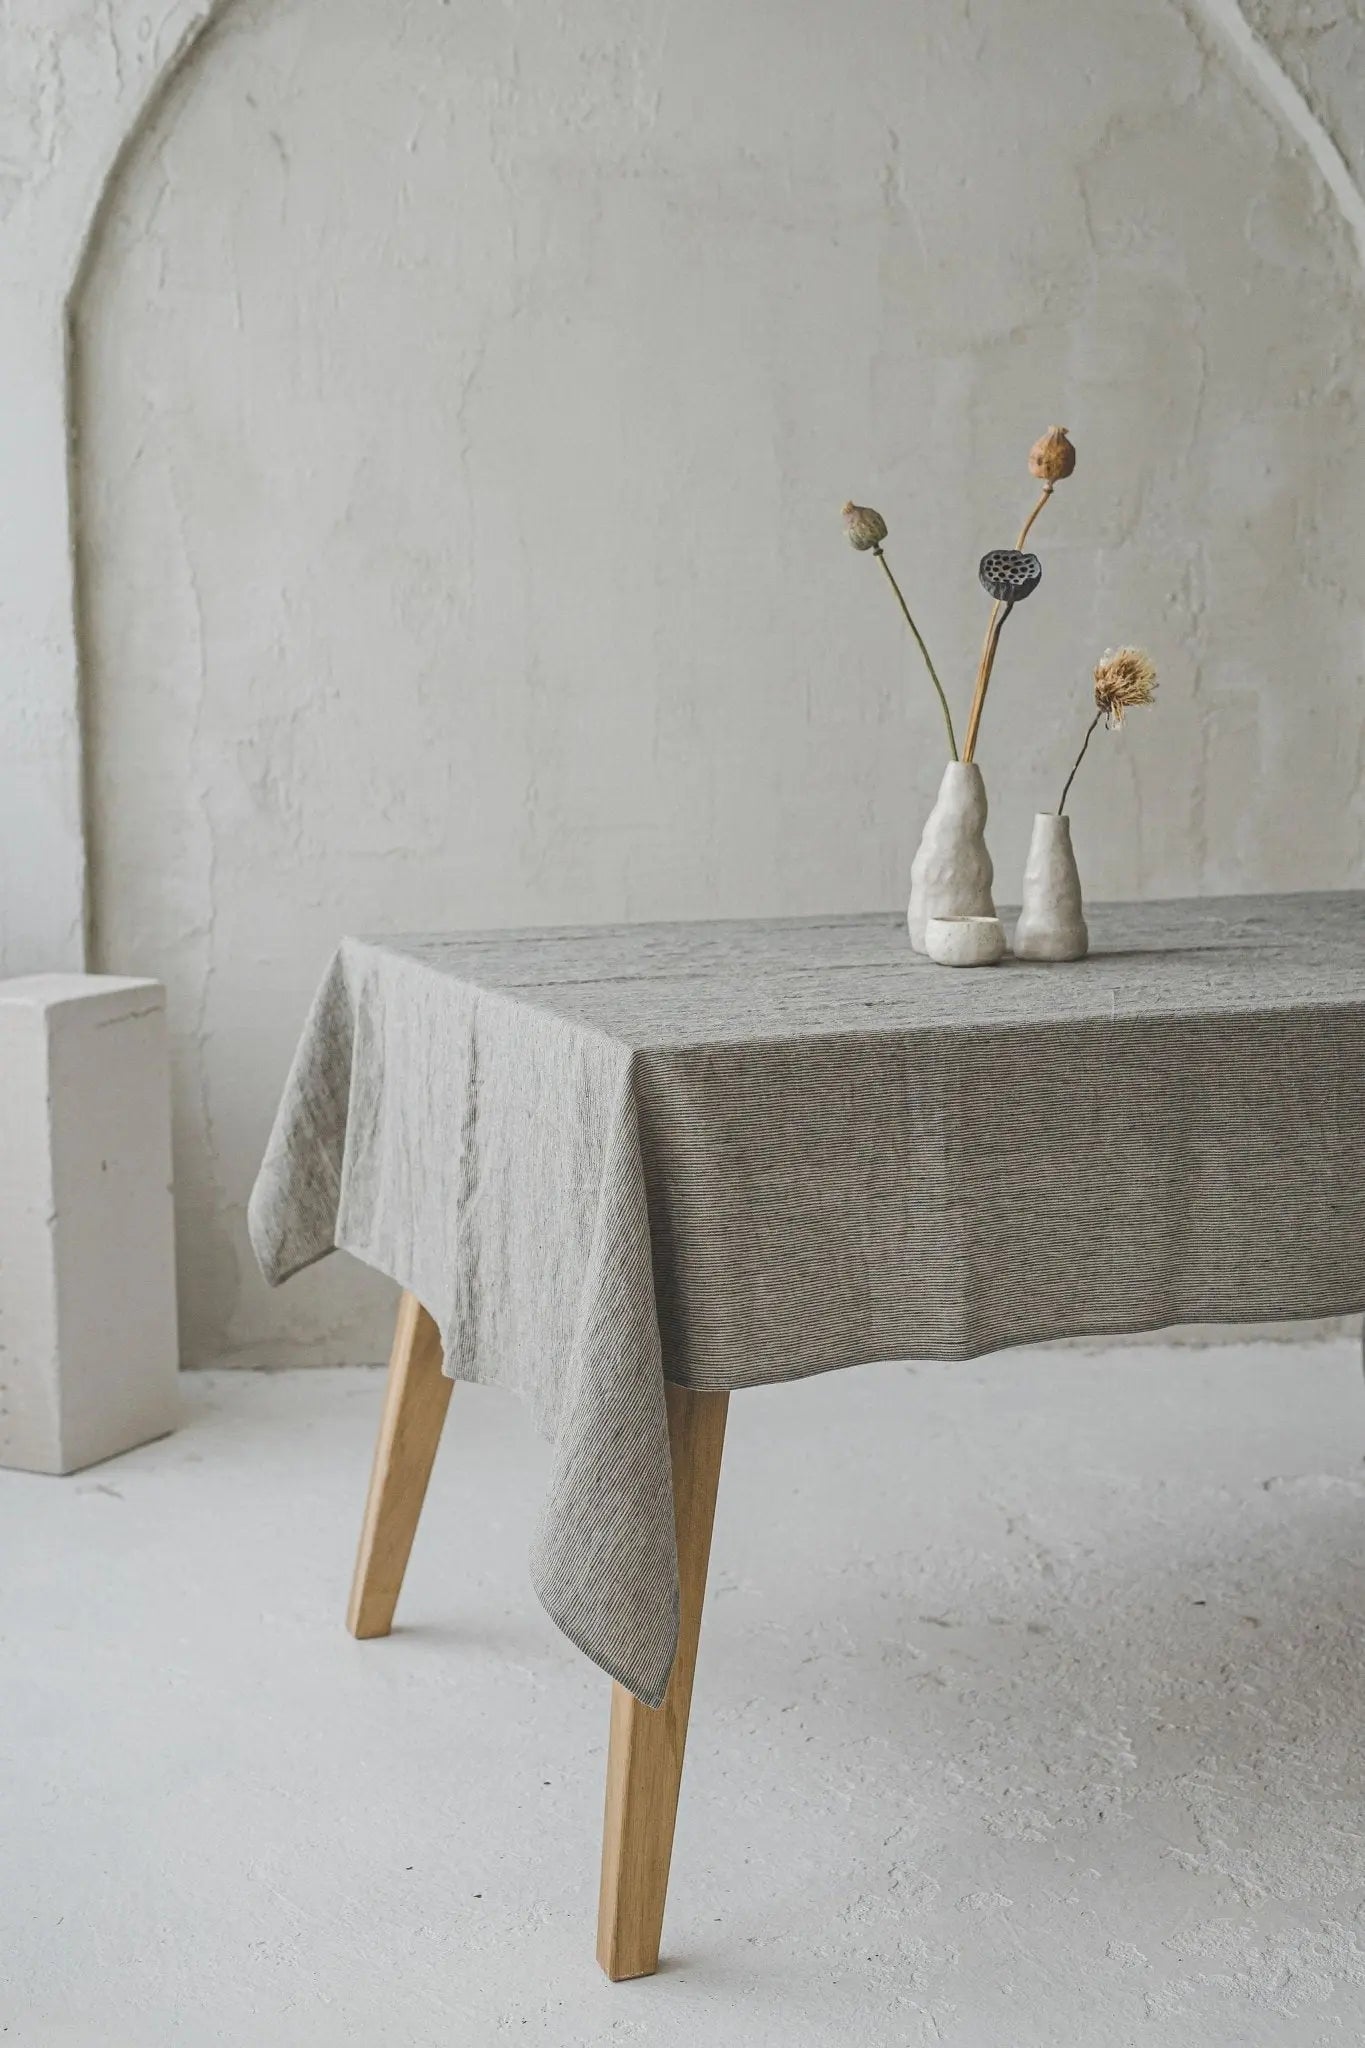 Natural Stonewashed Striped Linen Tablecloth - Epic Linen luxury linen